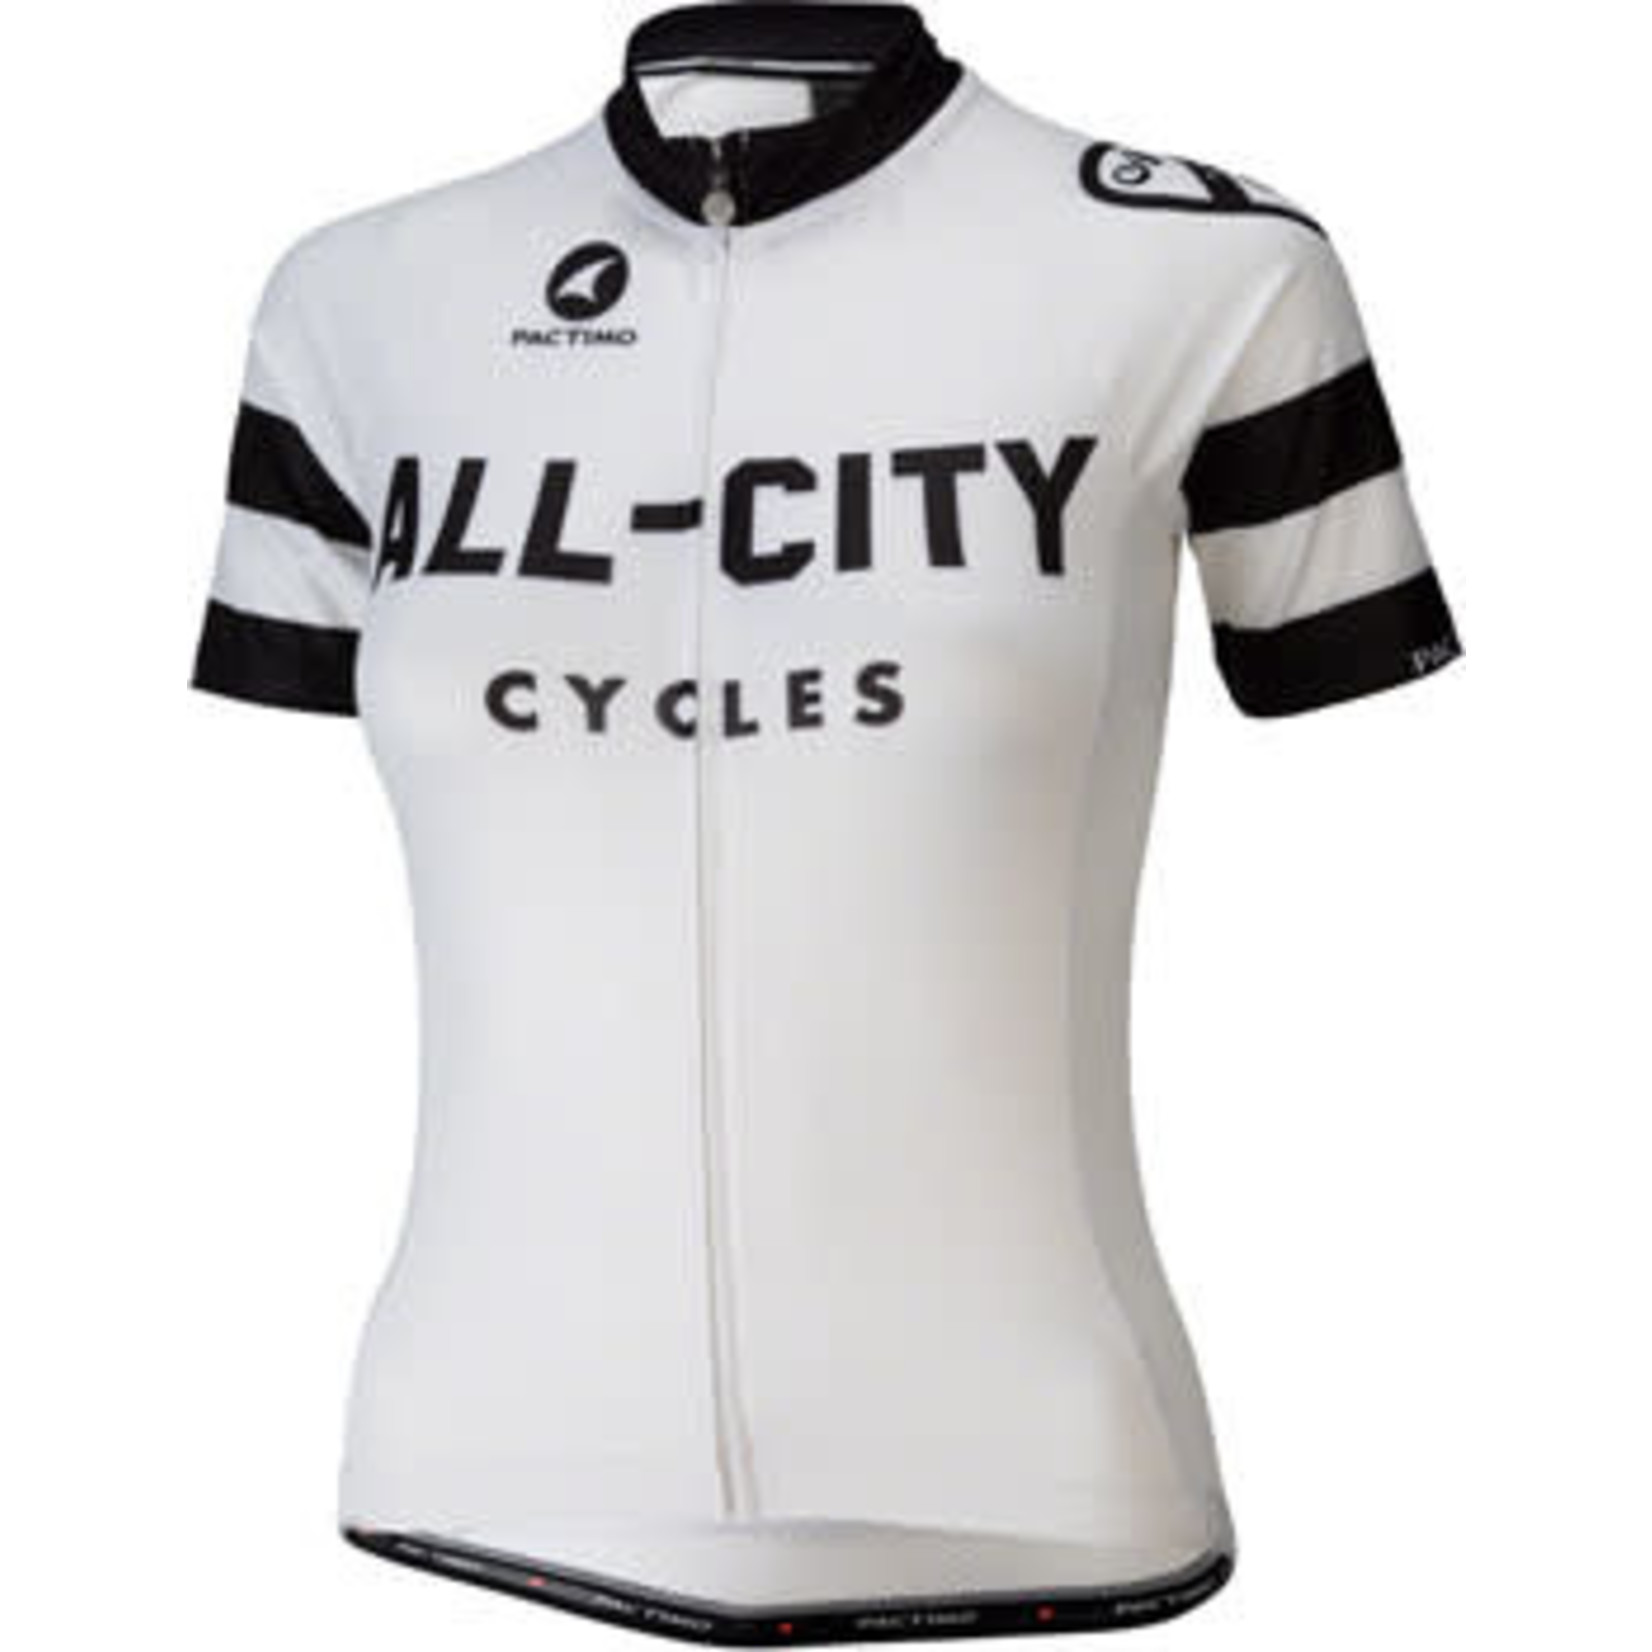 All-City Classic Jersey - White/Black, Short Sleeve, Women's, X-Large